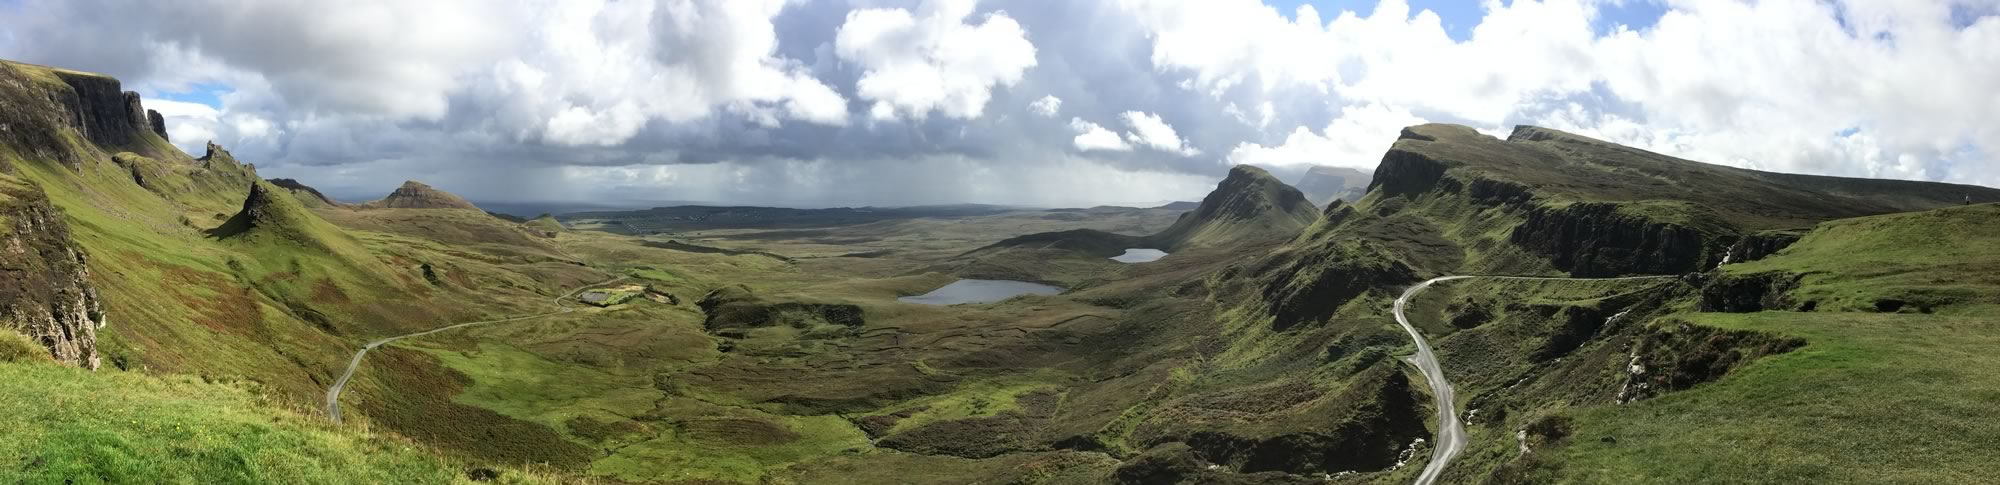 Picture of the Quiraing on Skye